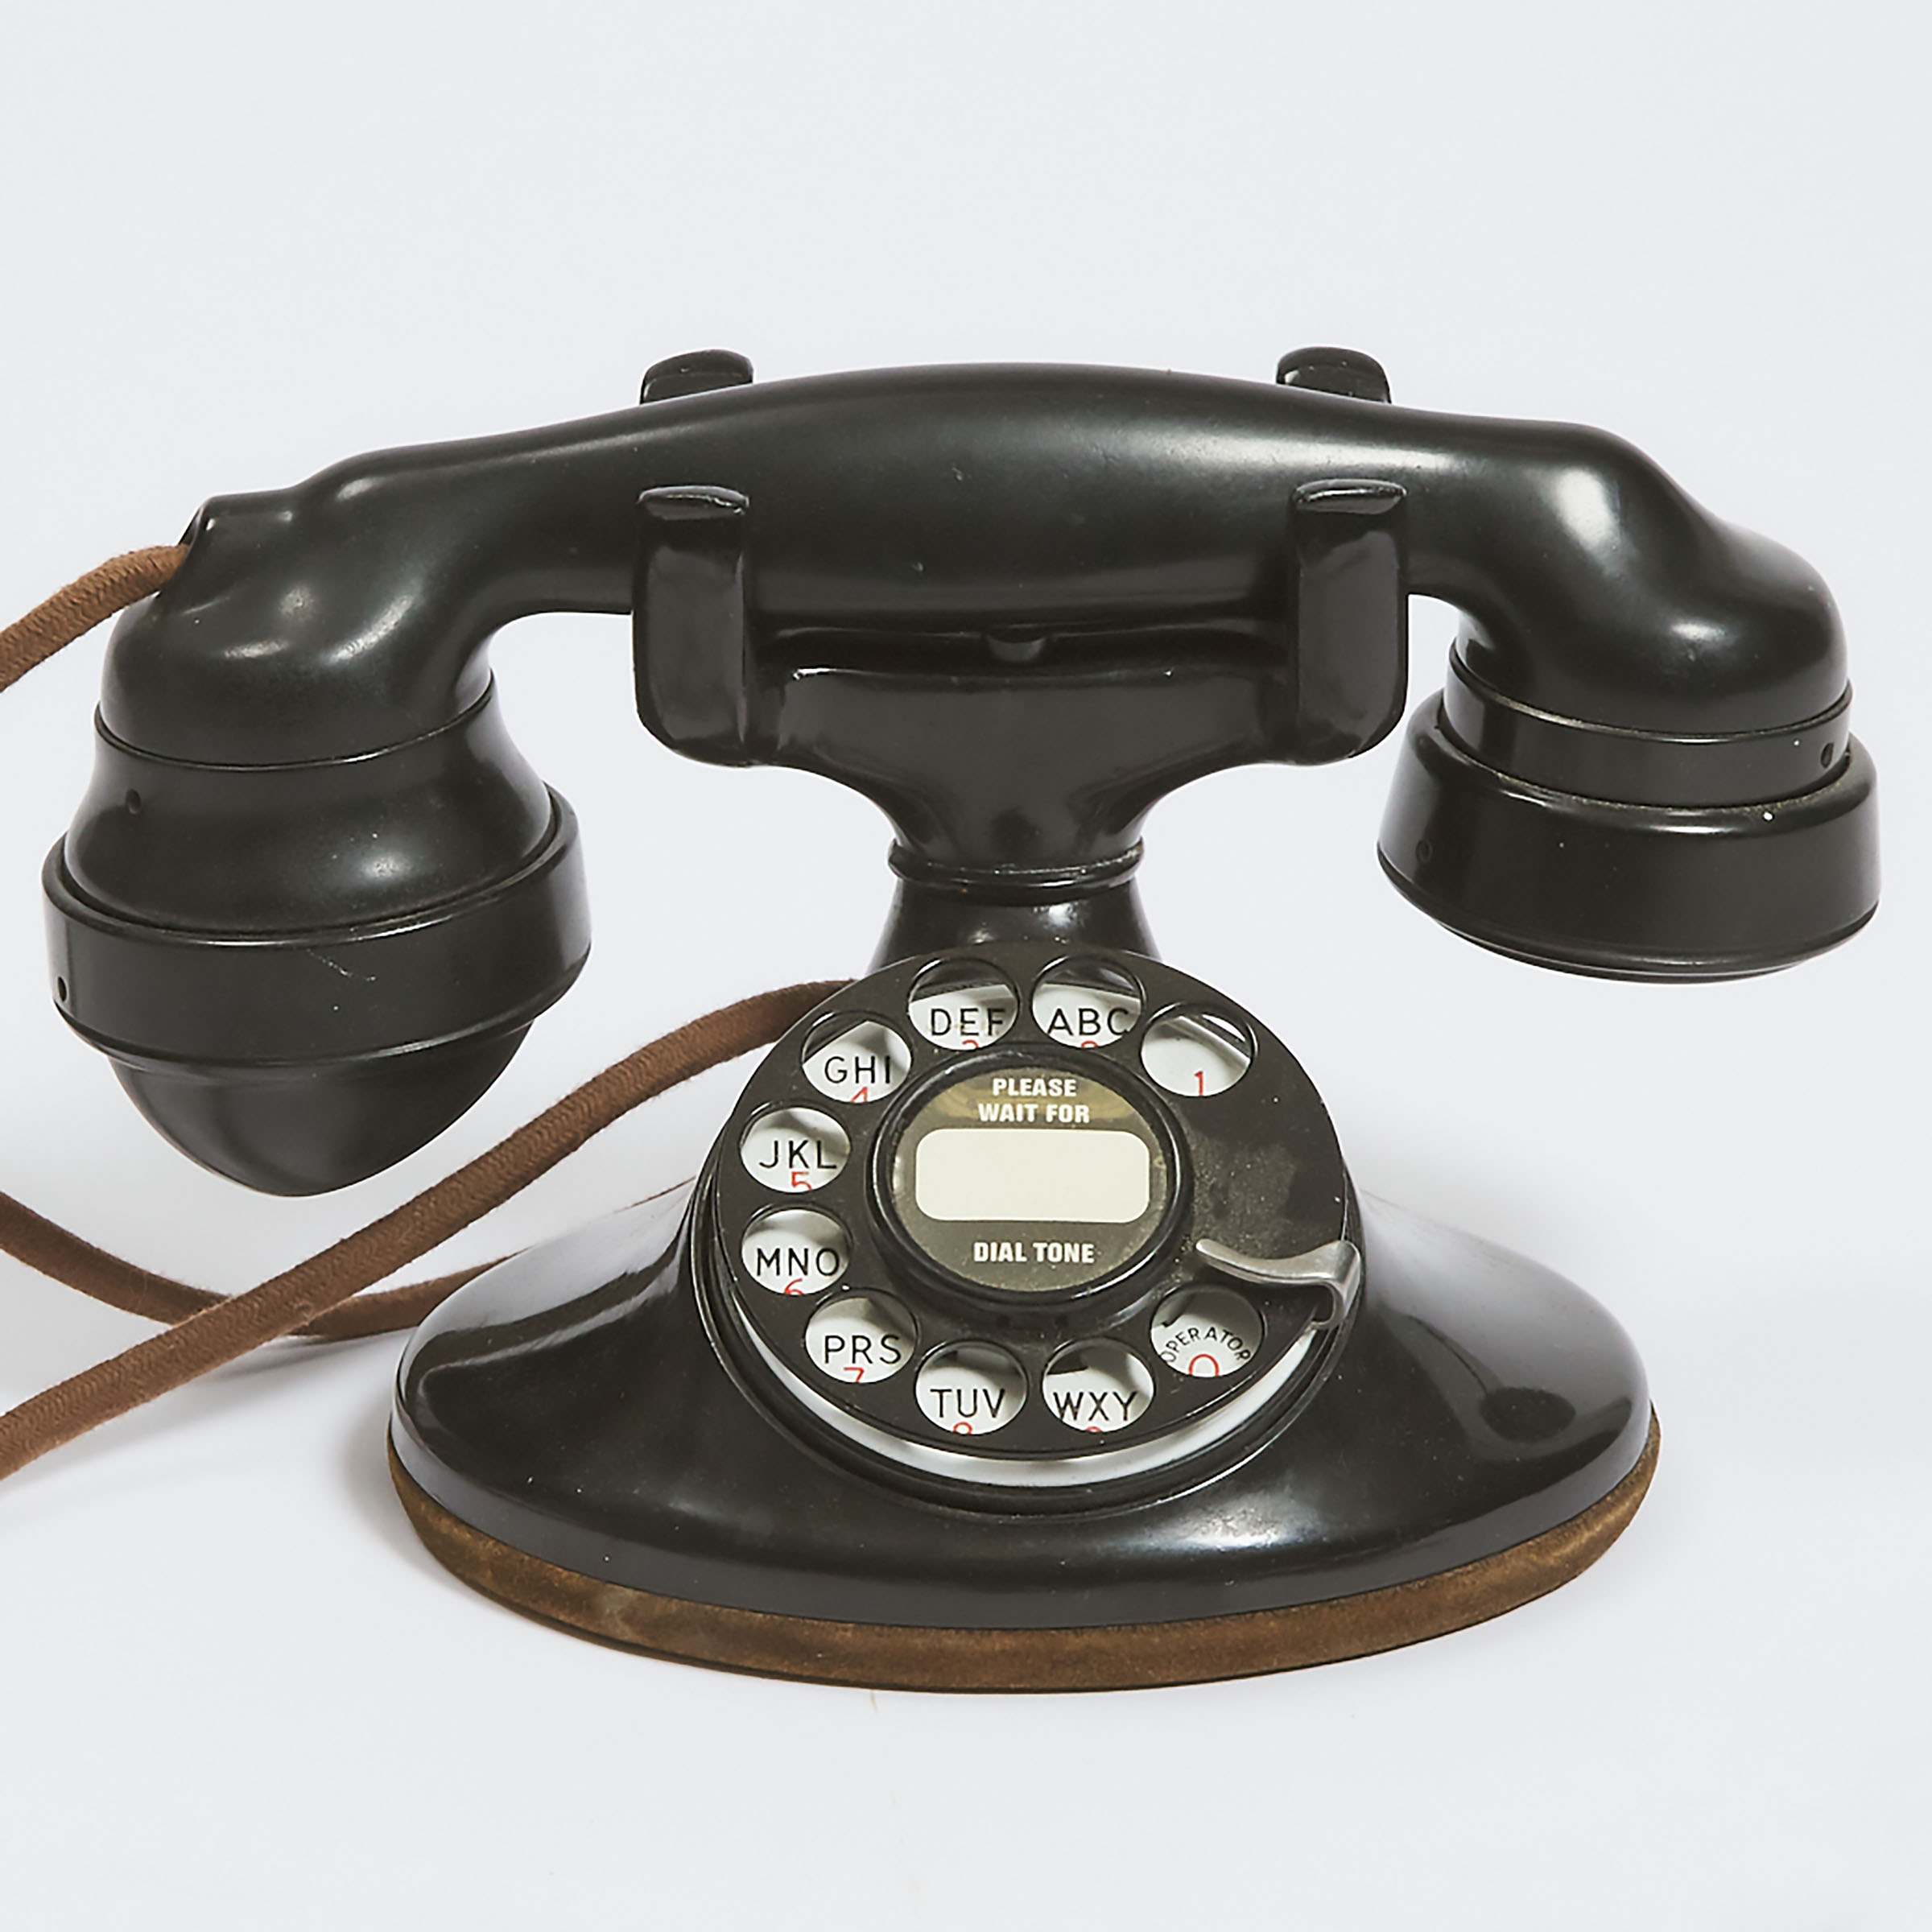 Northern Electric Company Model 202 Rotary Dial Telephone, c.1935